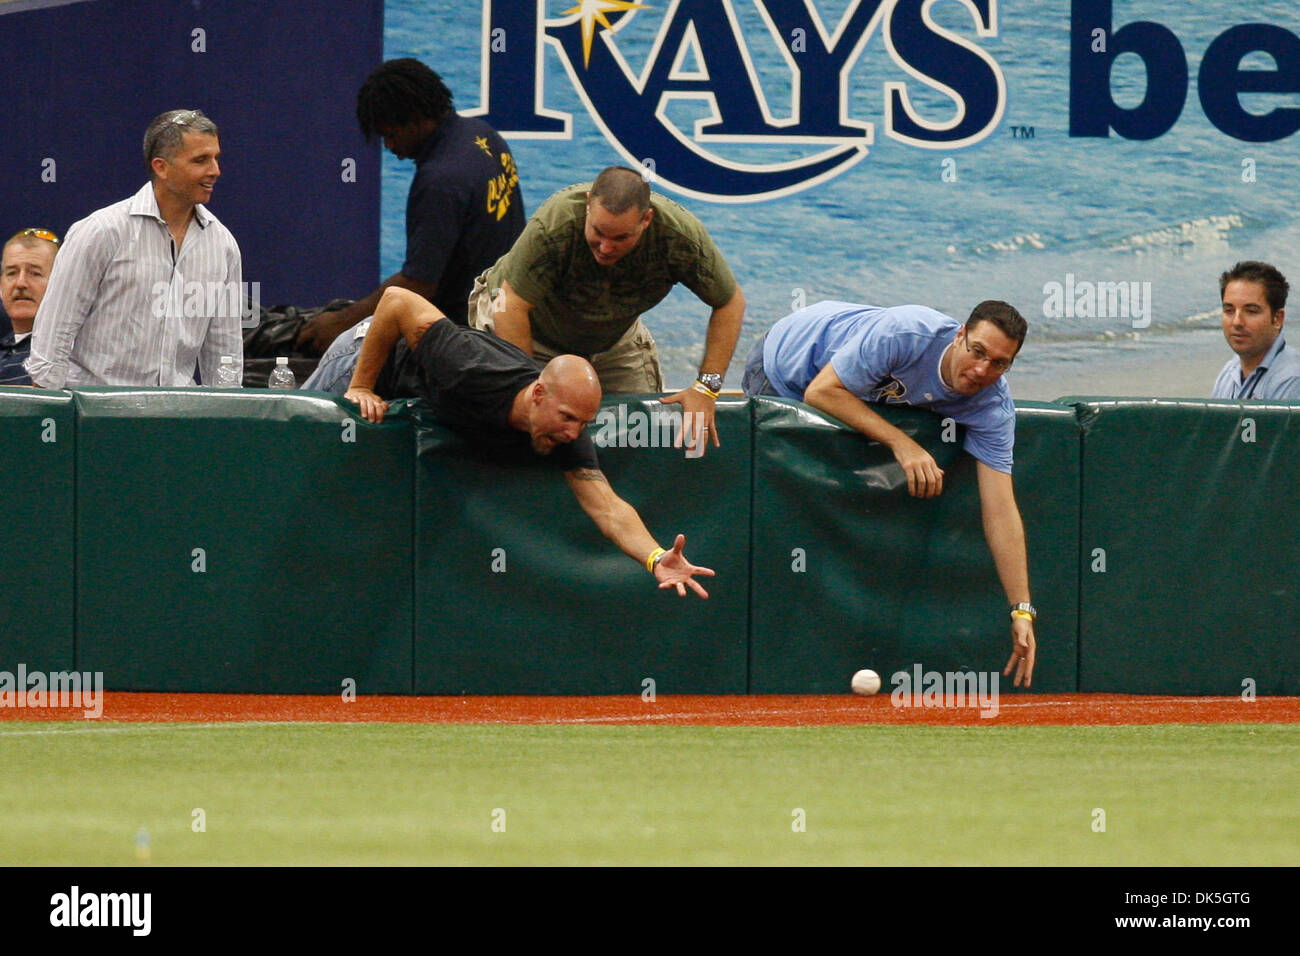 May 5, 2011 - St.Petersburg, Florida, U.S - Fans try and grab a ball during the match up between the Tampa Bay Rays and the Toronto Blue Jays at Tropicana Field. The Rays lead 3 - 0 (Credit Image: © Luke Johnson/Southcreek Global/ZUMApress.com) Stock Photo